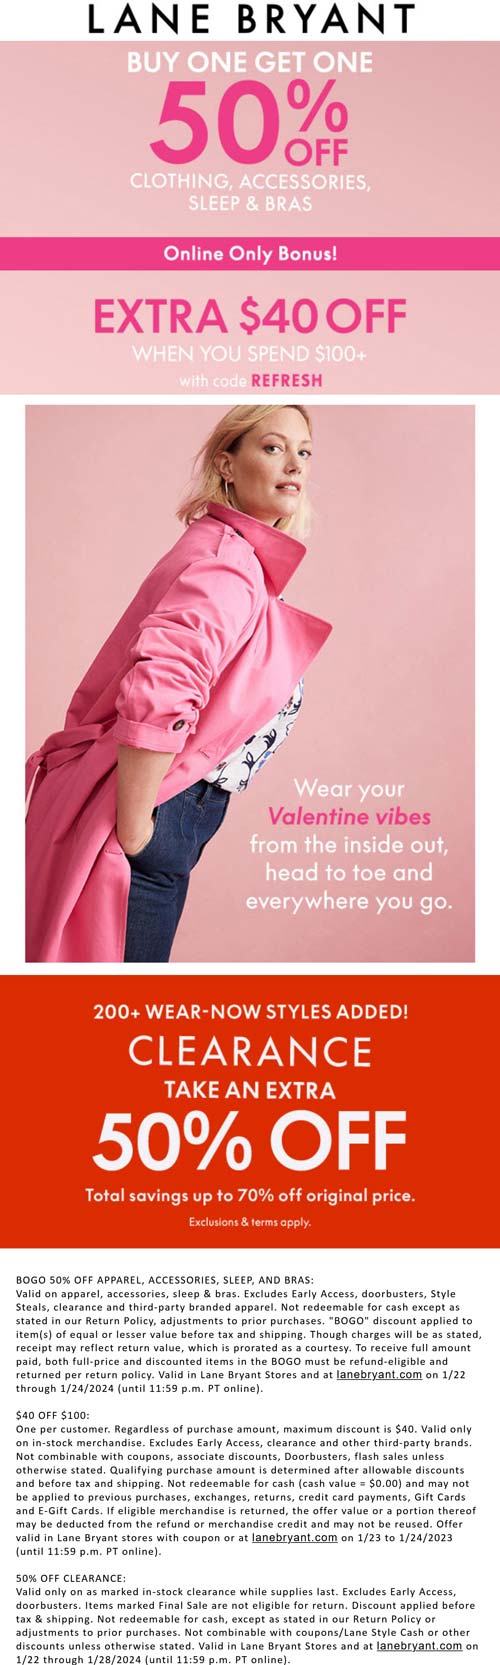 $40 off $100 + extra 50% off clearance & more at Lane Bryant via promo code REFRESH #lanebryant